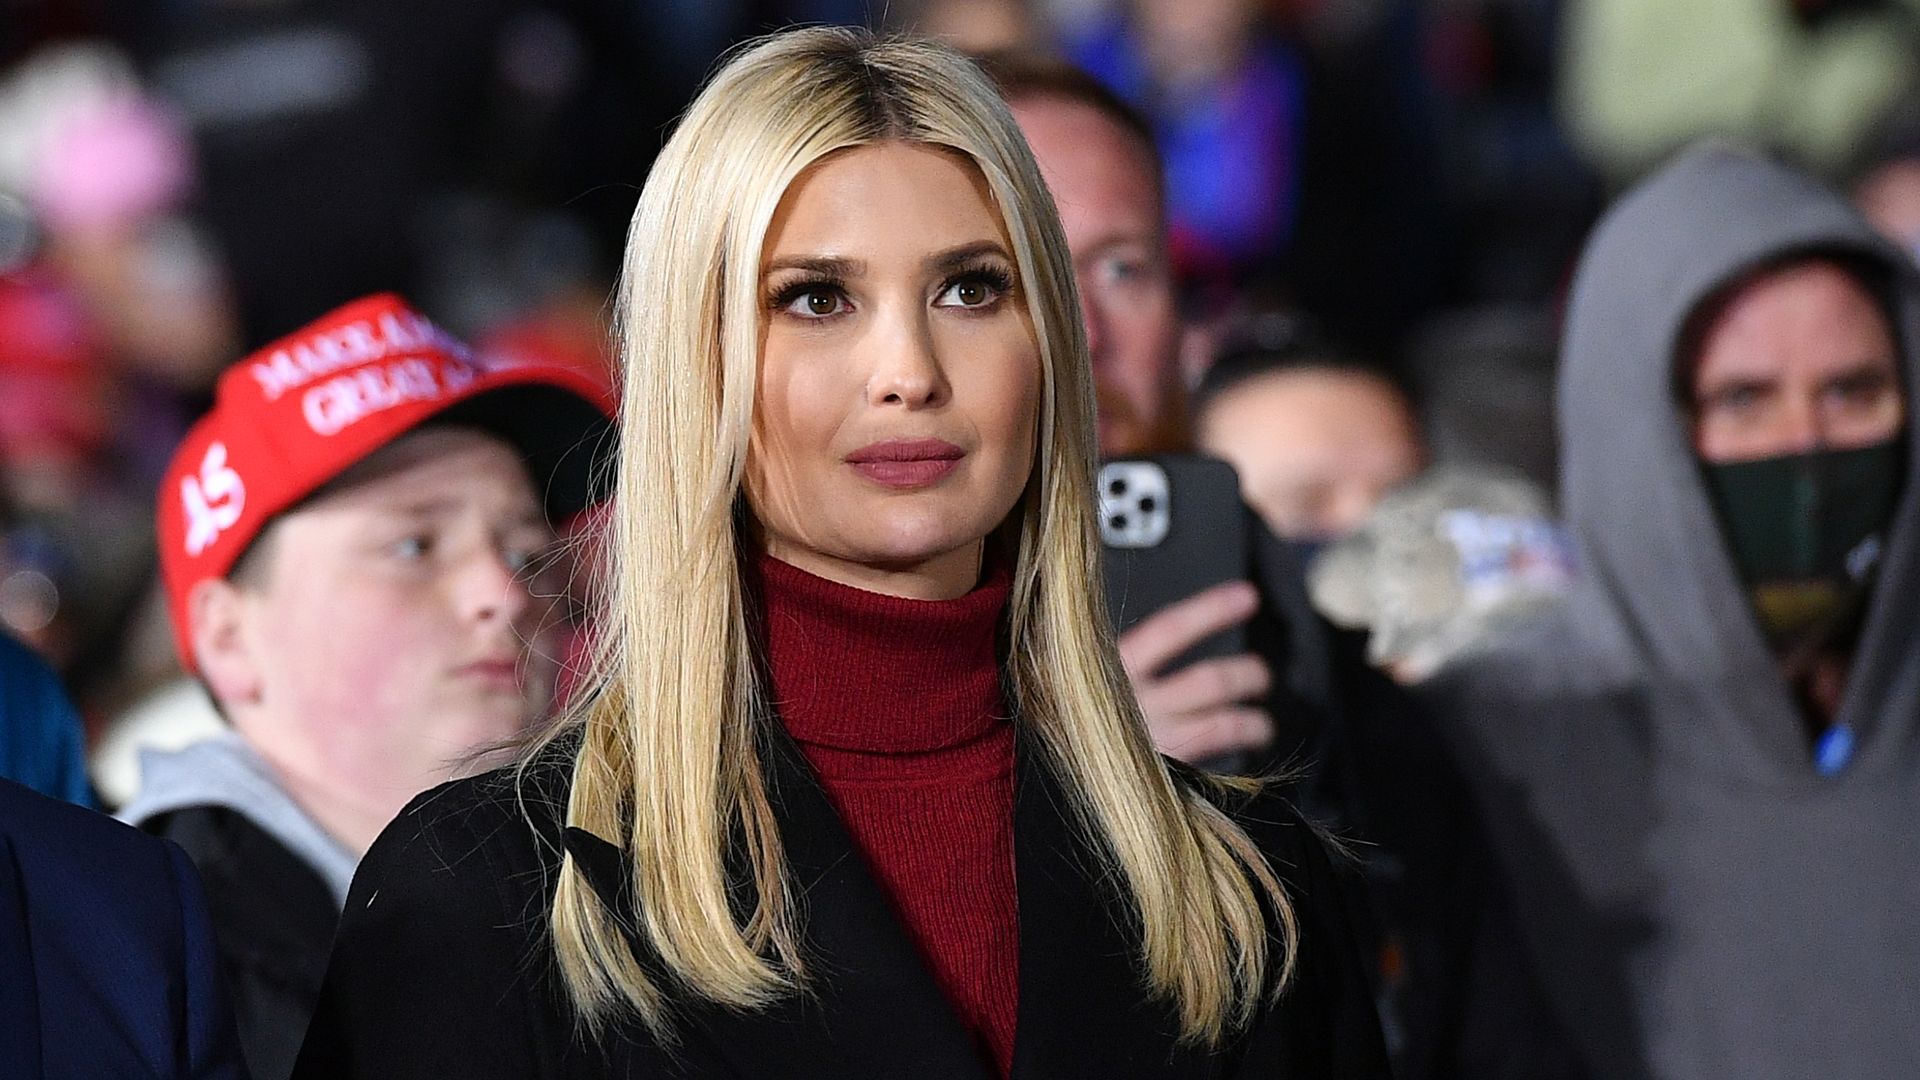 Ivanka Trump is seen listening to a speech delivered by her father, former President Trump.